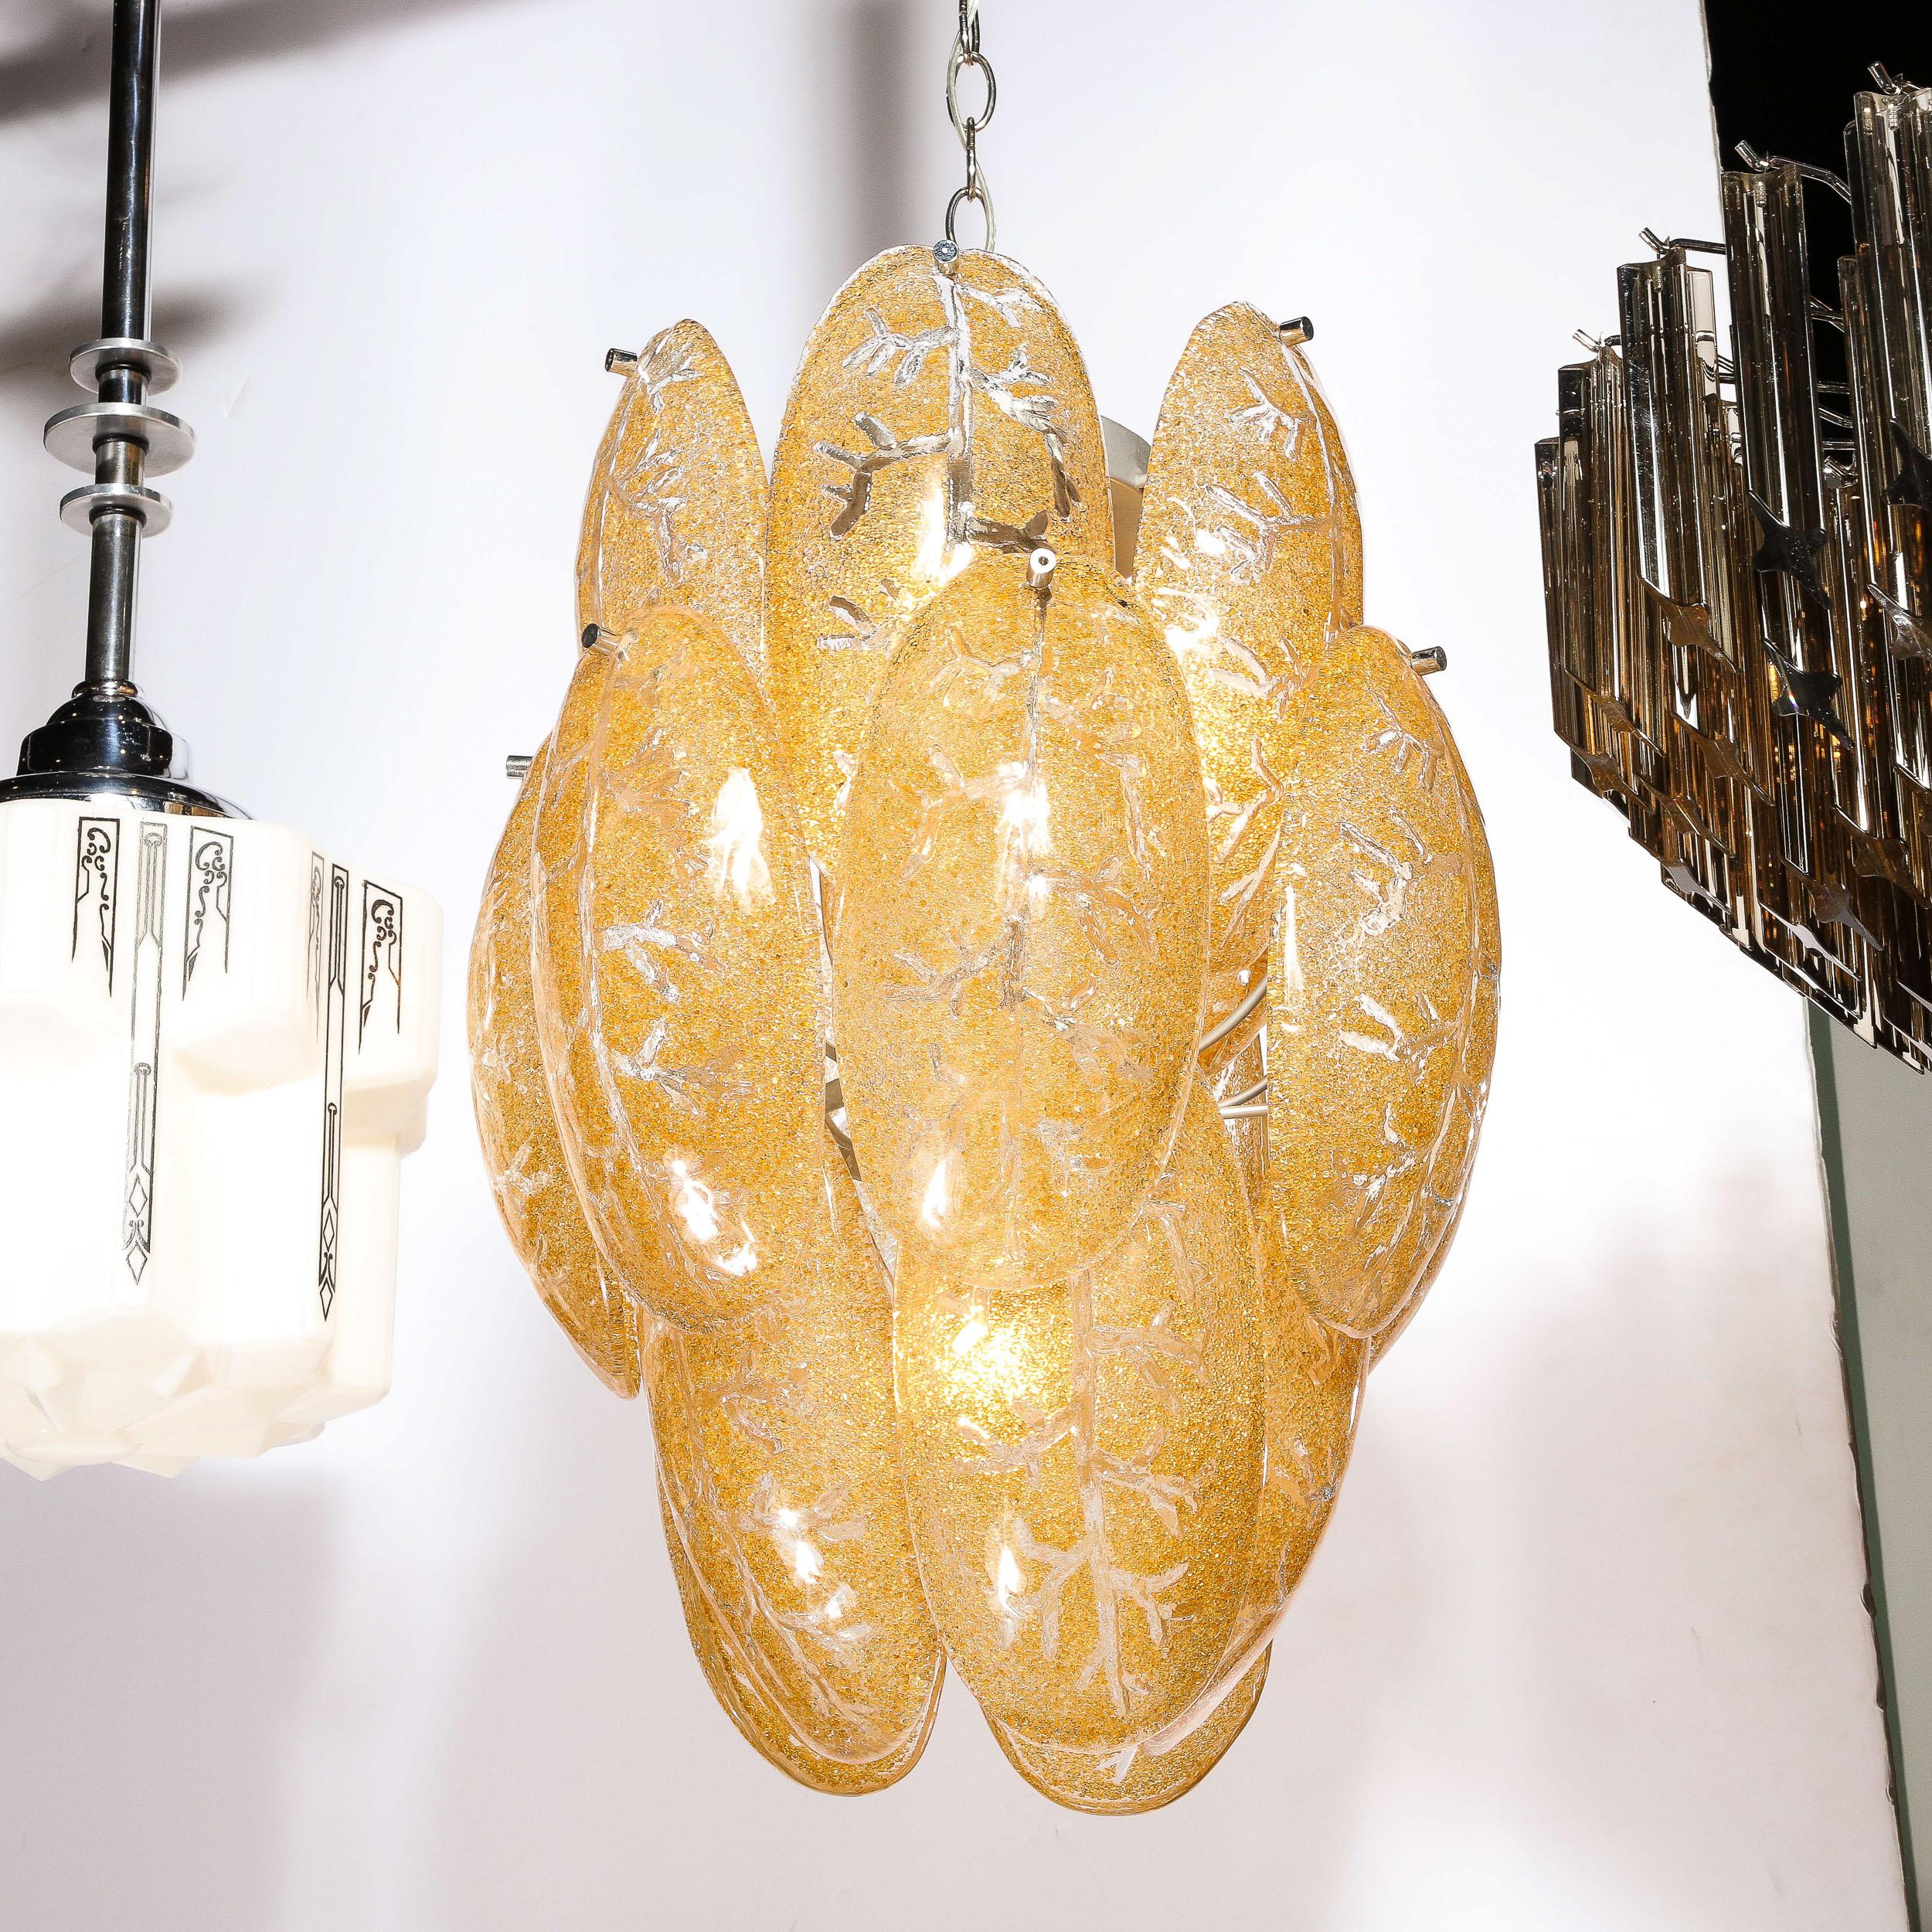 Italian Mid-Century Modern Three-Tier Leaf Form Chandelier in Crushed Gold Murano Glass For Sale